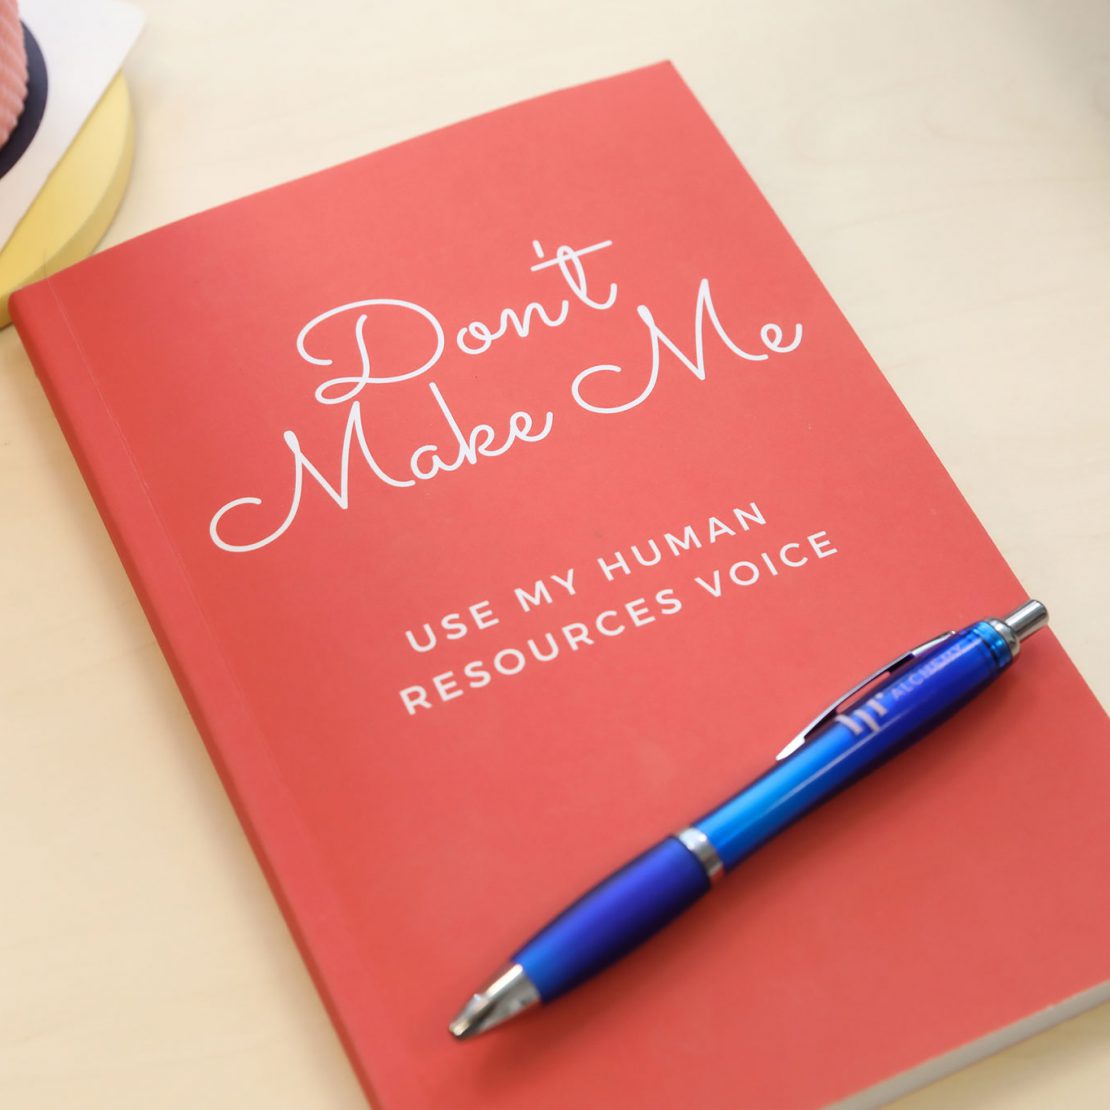 Don’t make me book cover